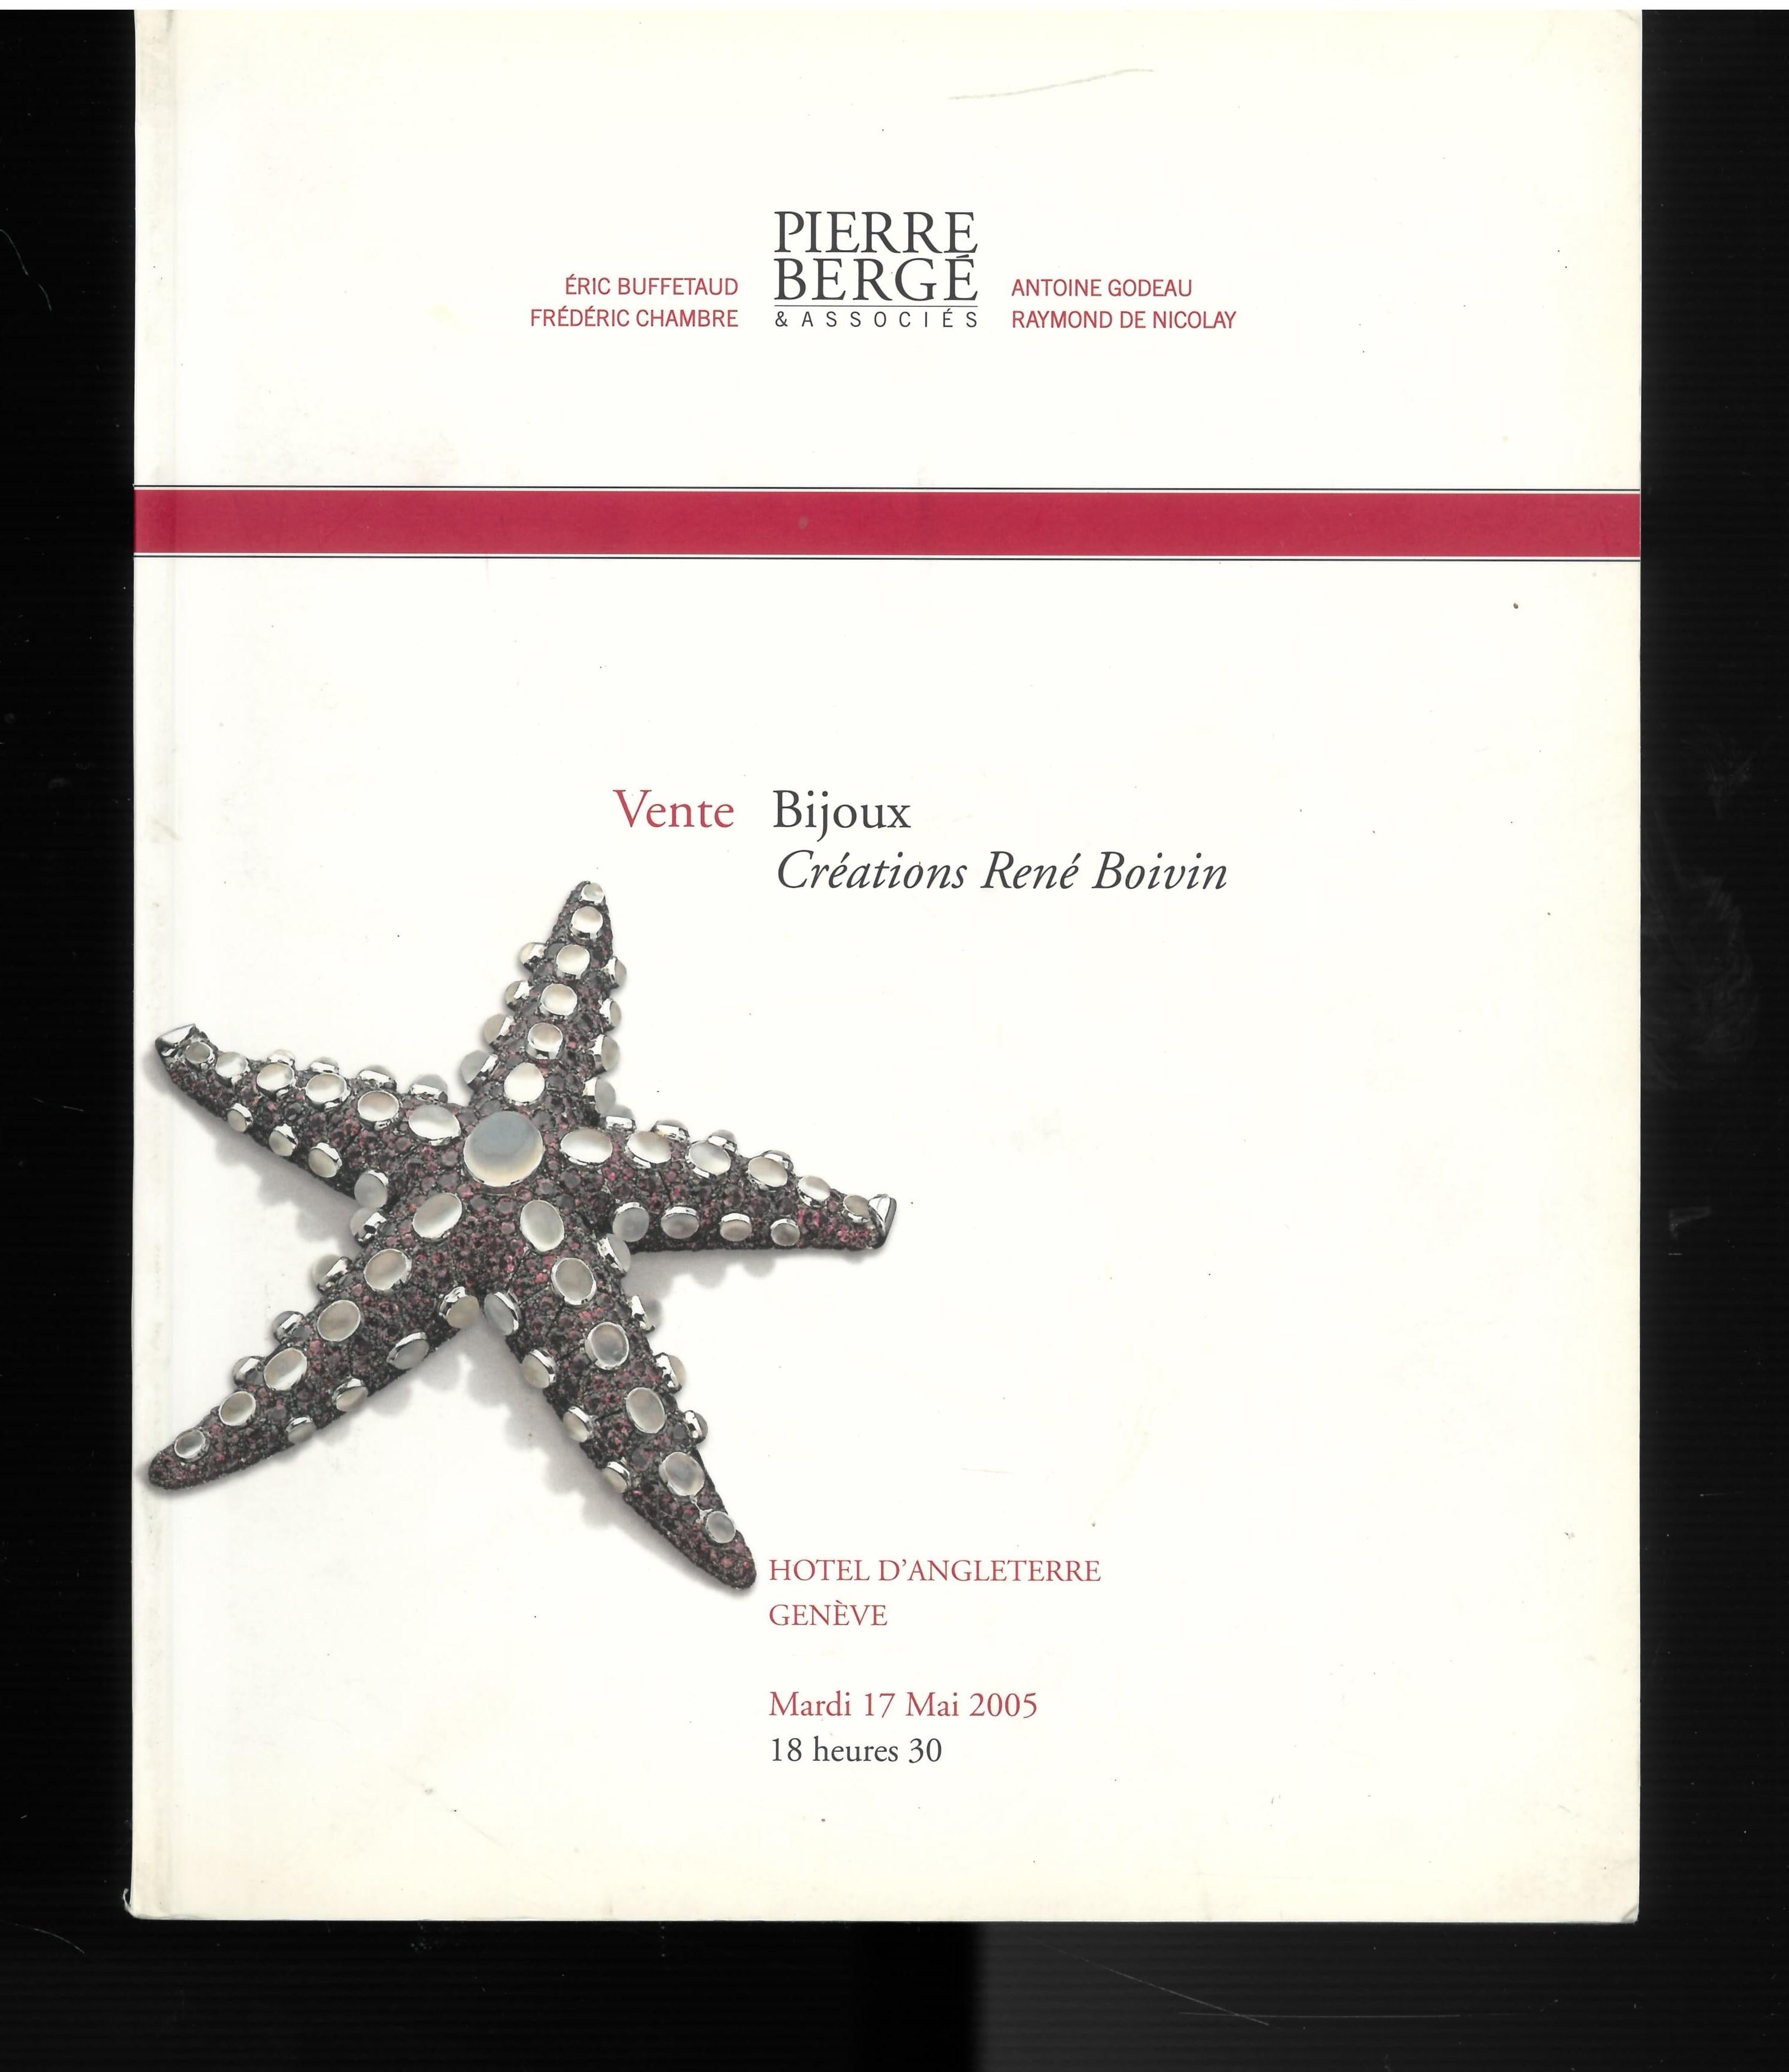 Dating from May 2005, this is a sale catalogue produced by Pierre Berge & Associates. For a unique sale of Rene Boivin jewels - the catalogue in its forward states as follows 